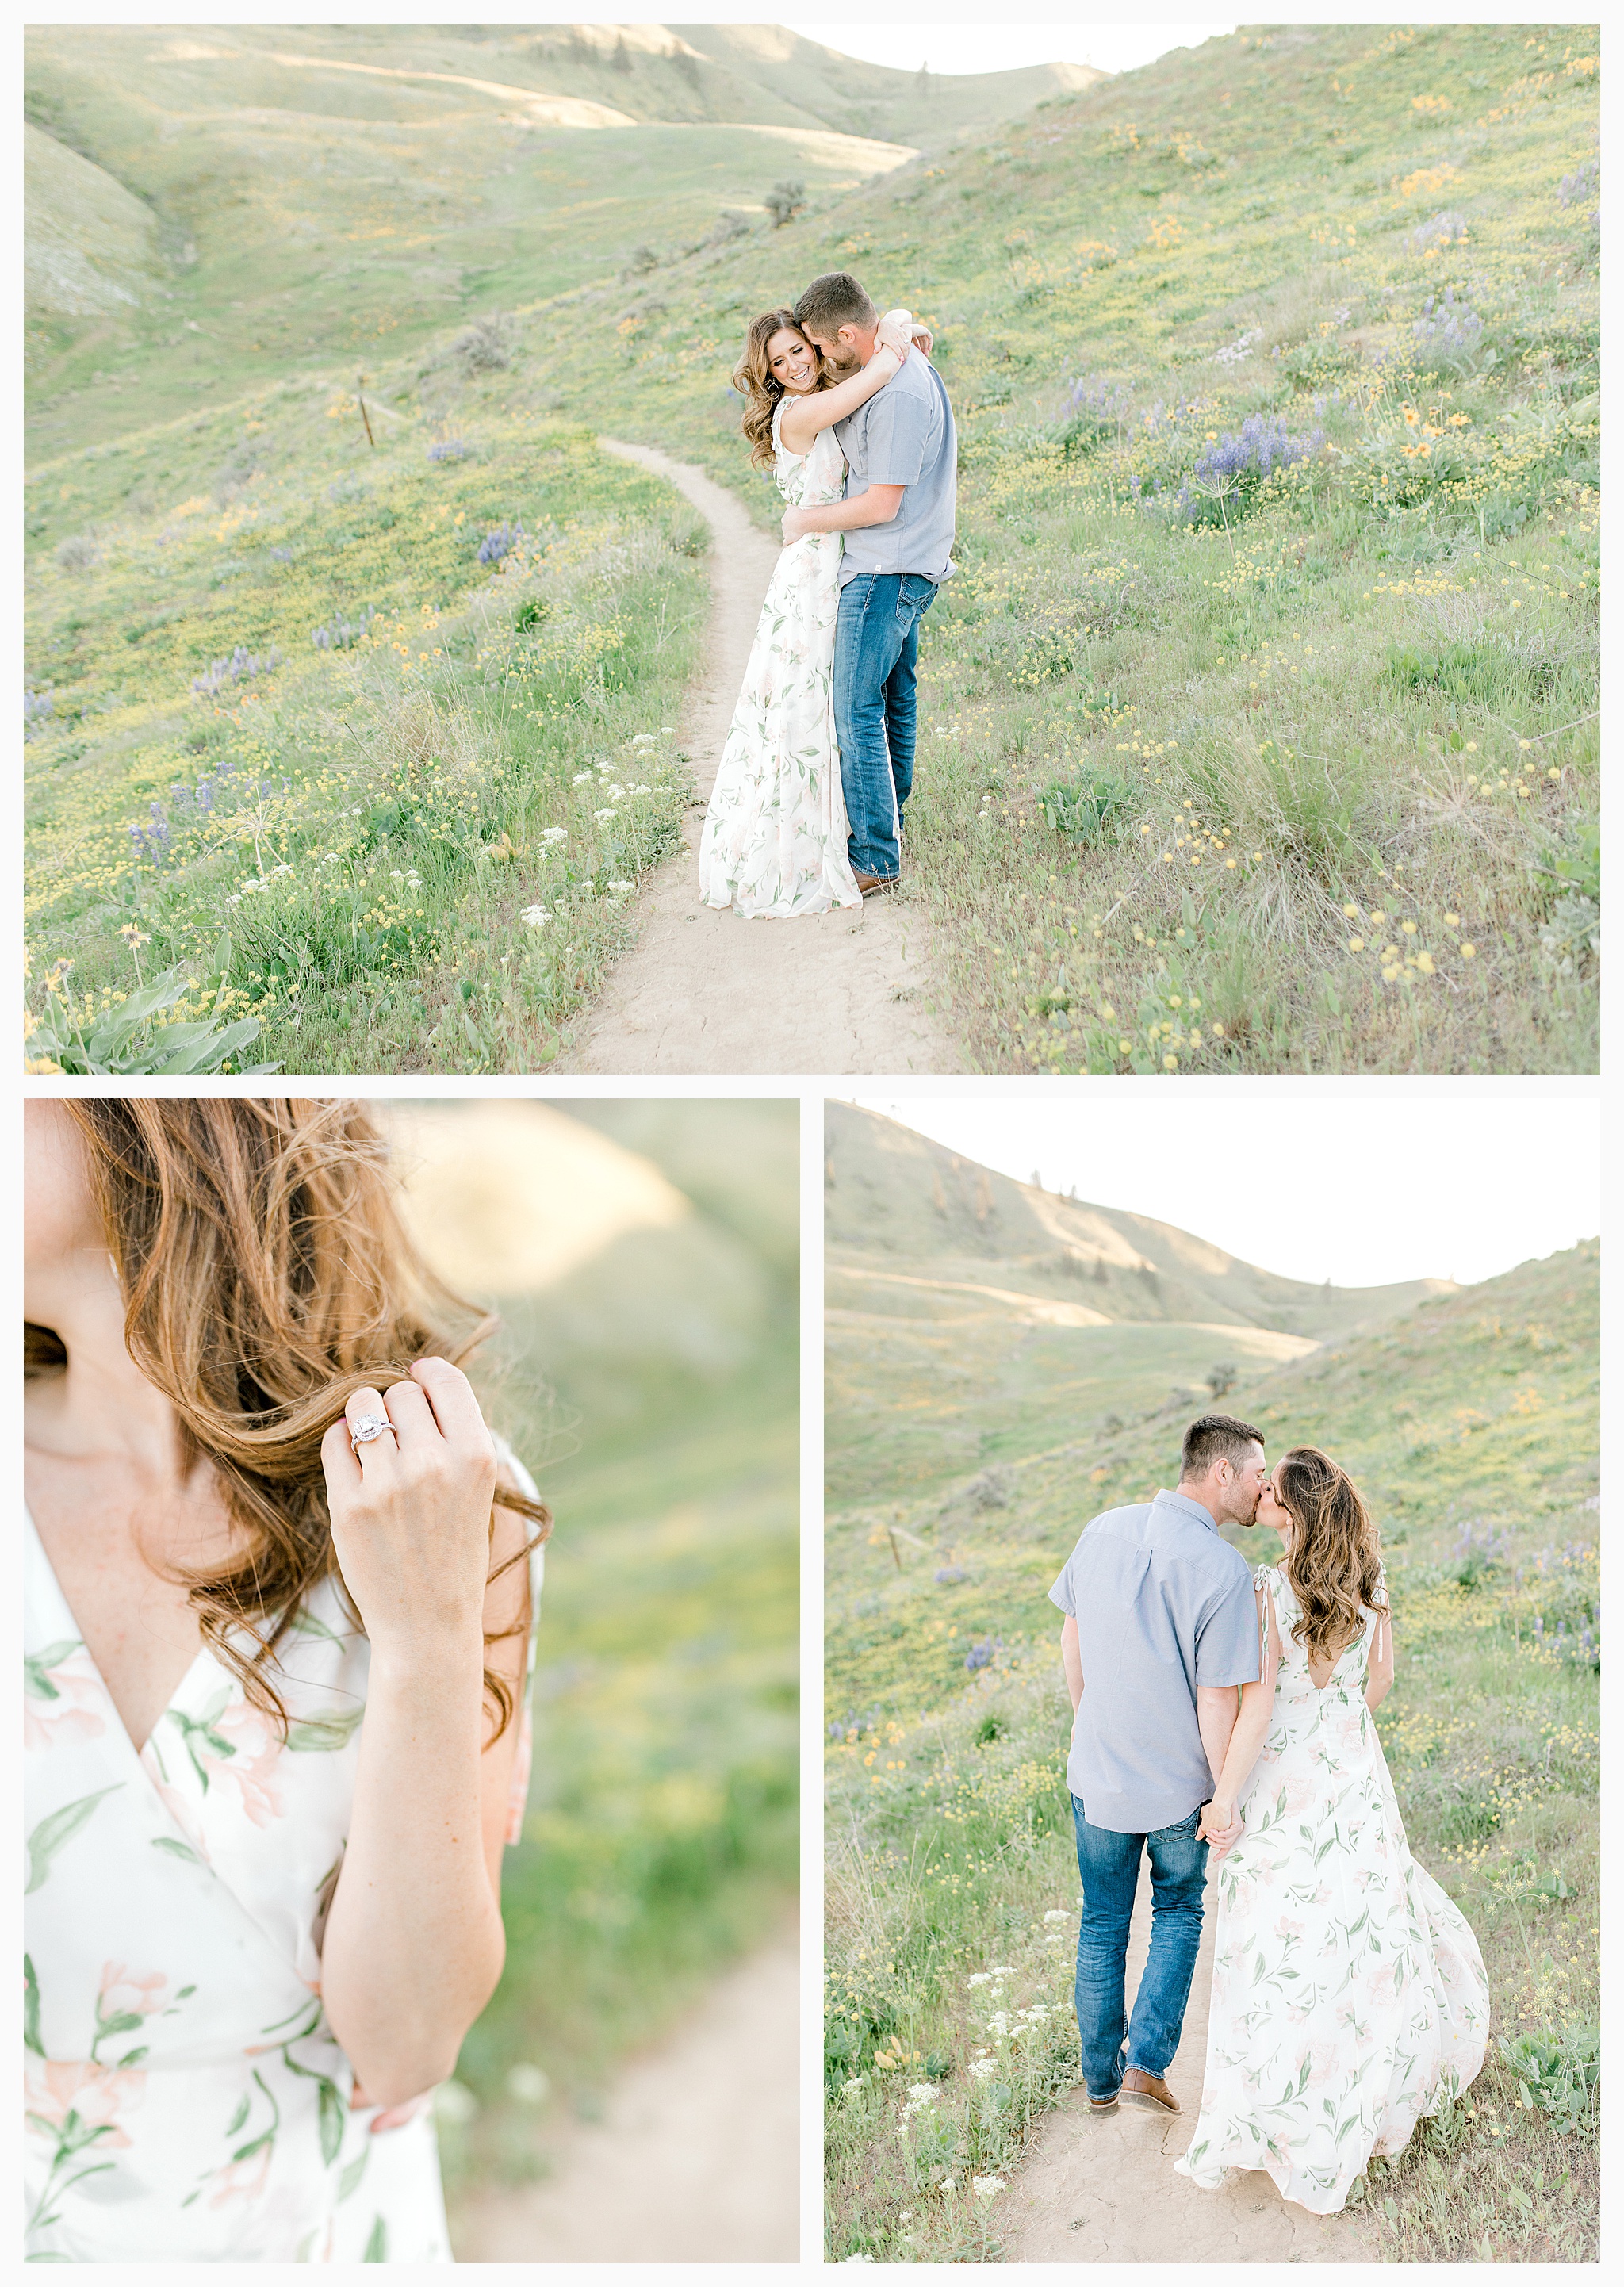 Engagement session amongst the wildflowers in Wenatchee, Washington | Engagement Session Outfit Inspiration for Wedding Photography with Emma Rose Company | Light and Airy PNW Photographer, Seattle Bride_0011.jpg